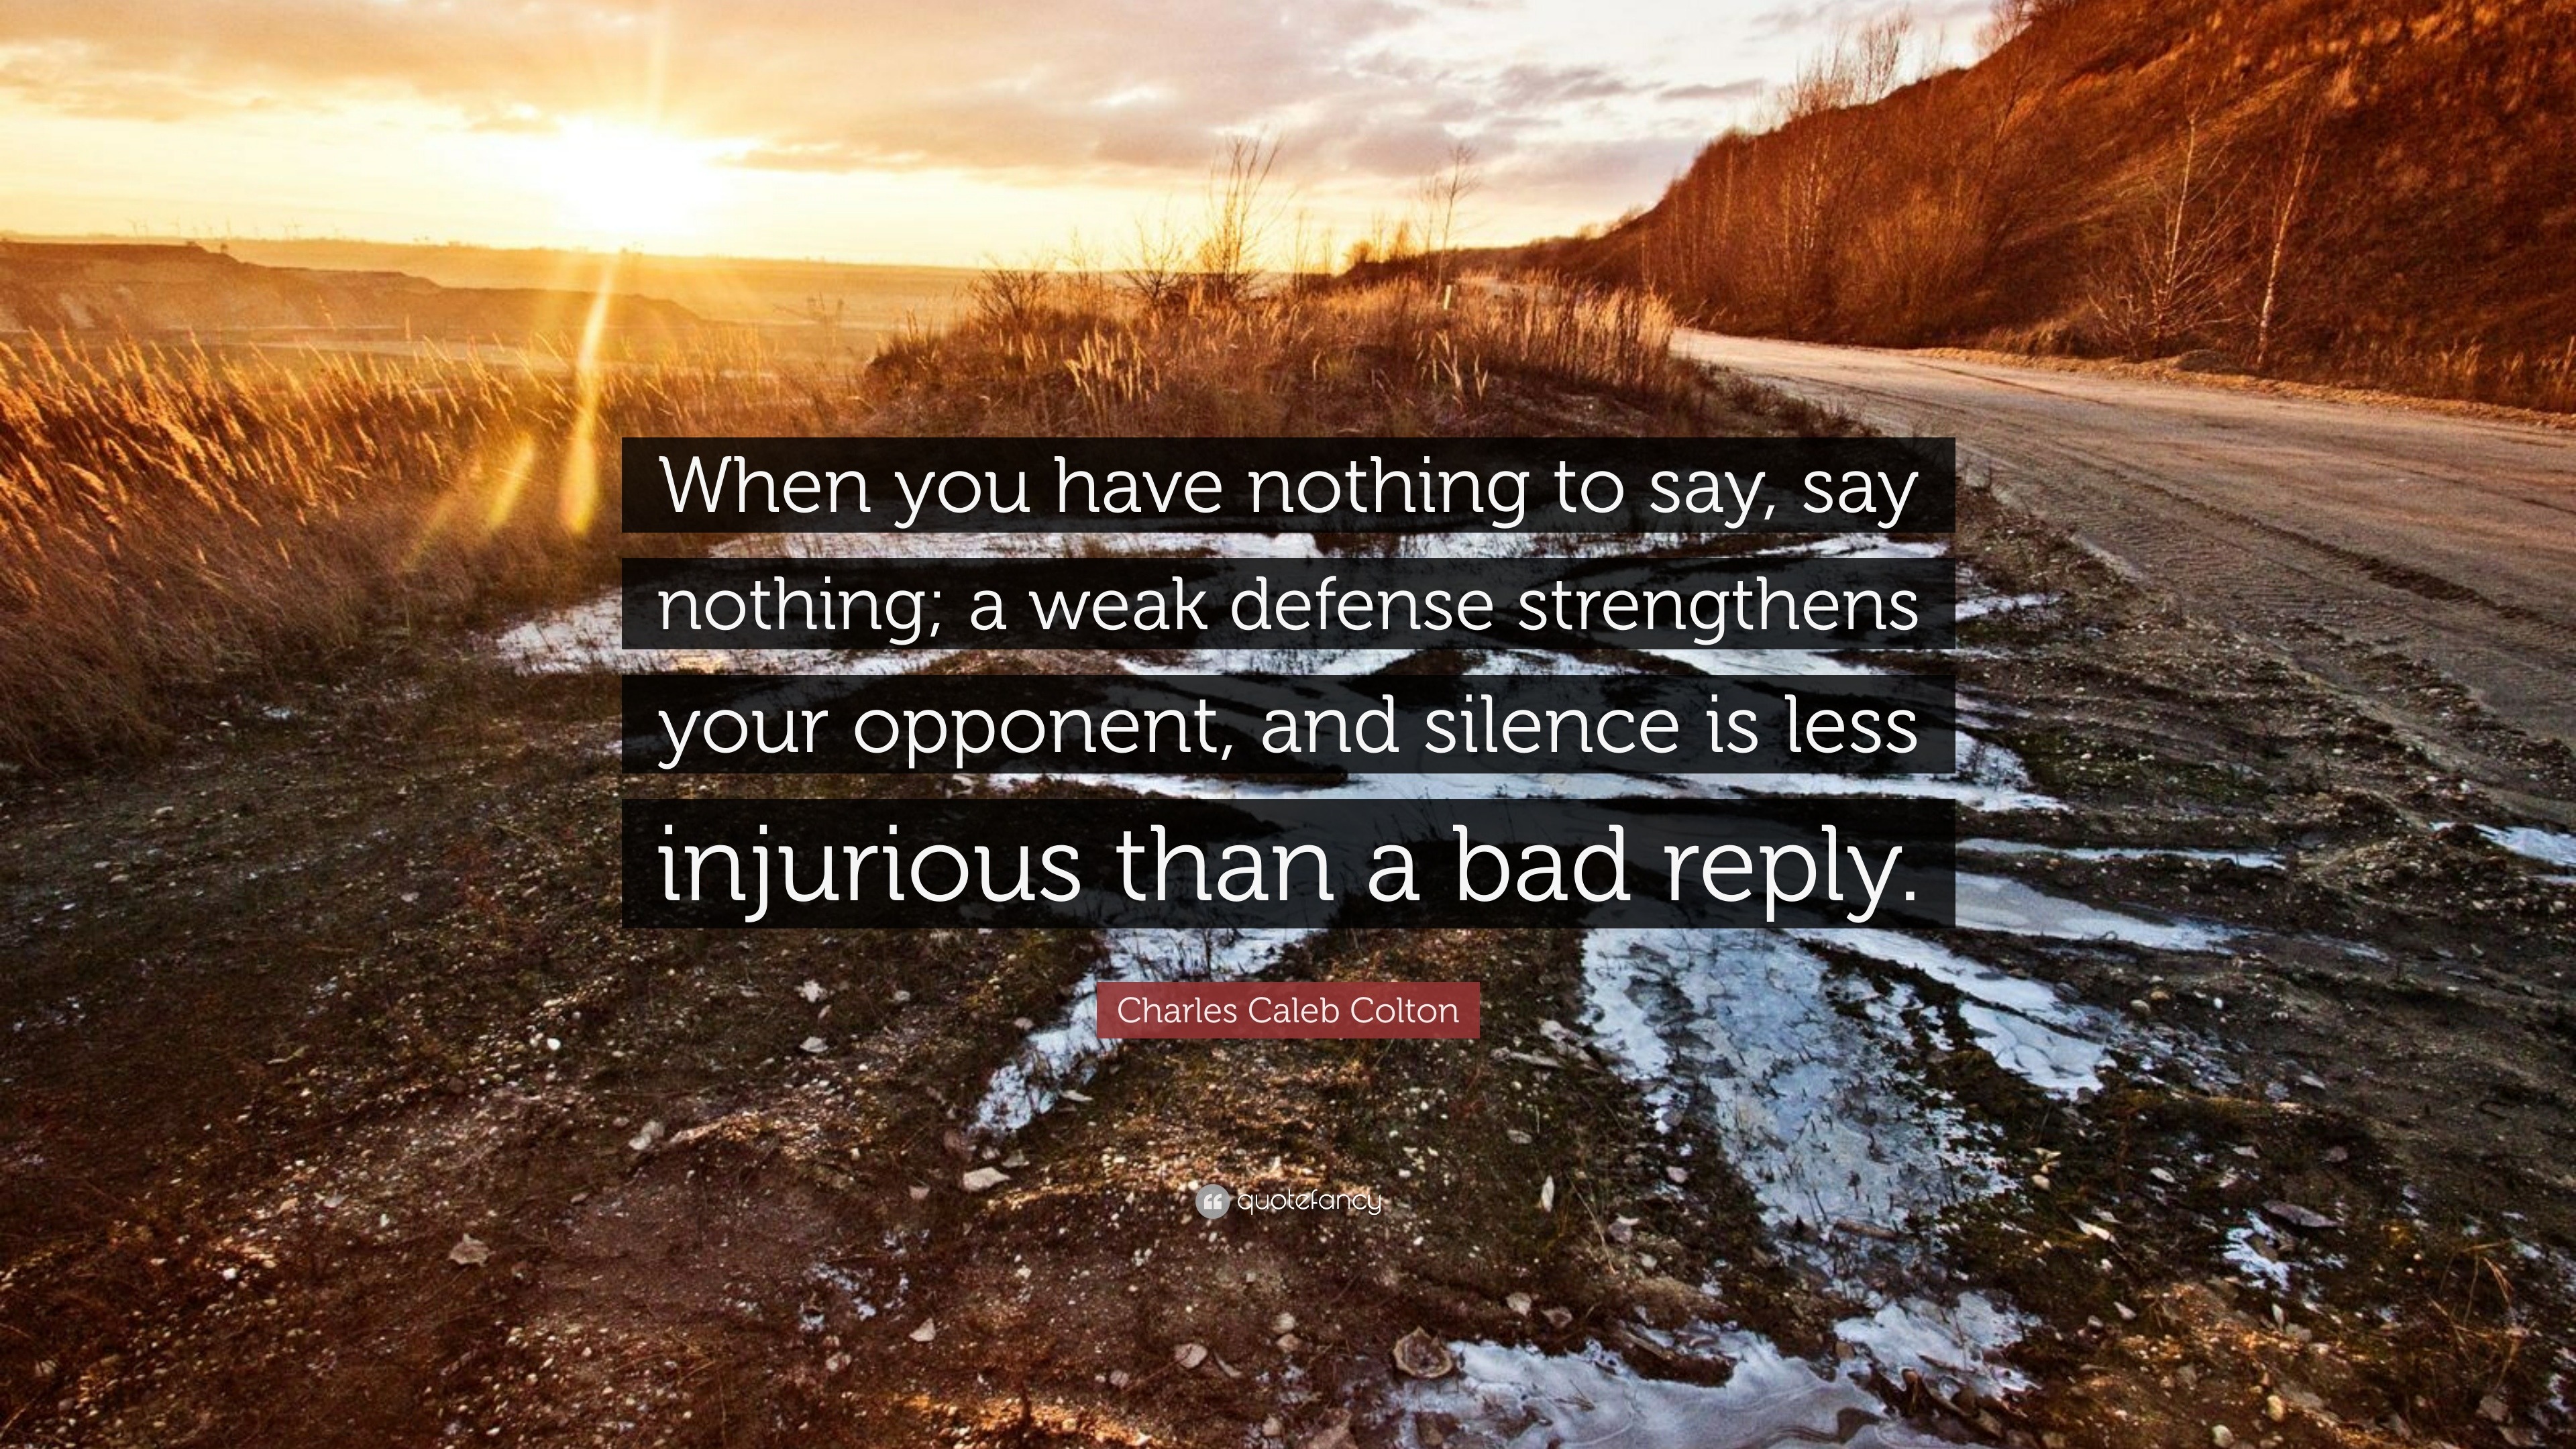 quotes about silence being bad